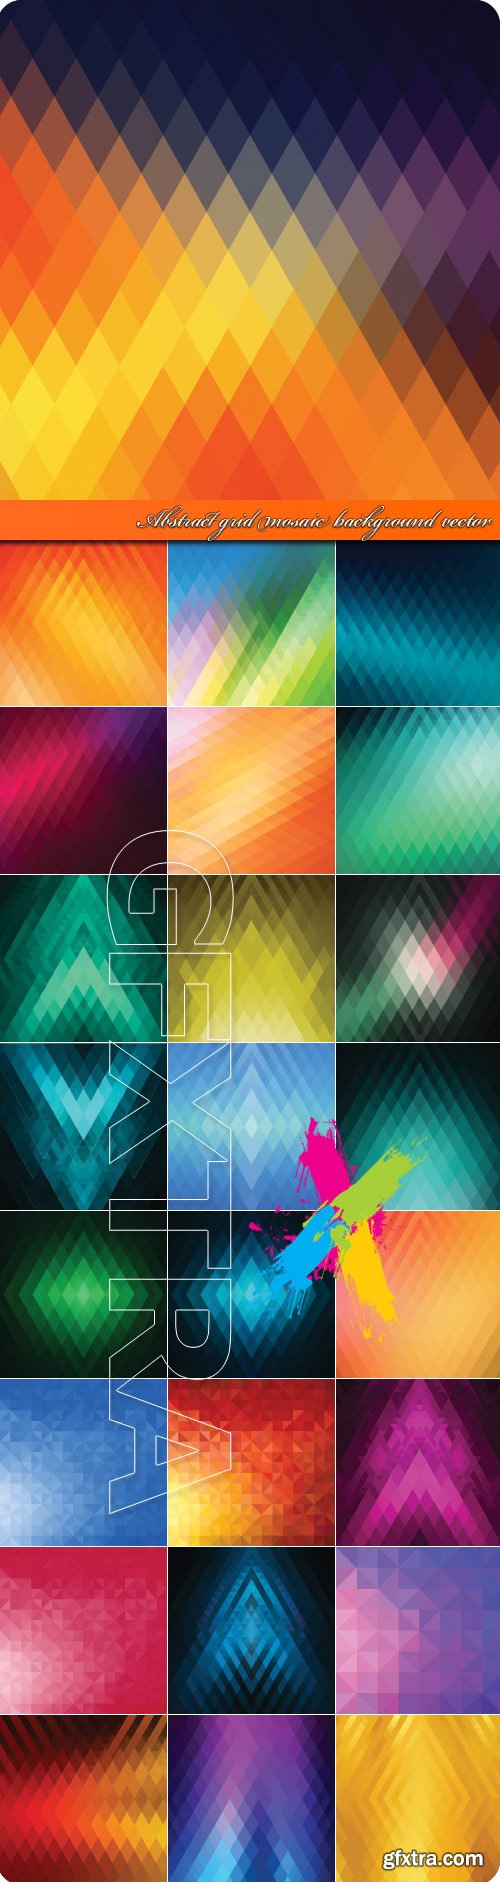 Abstract grid mosaic background vector